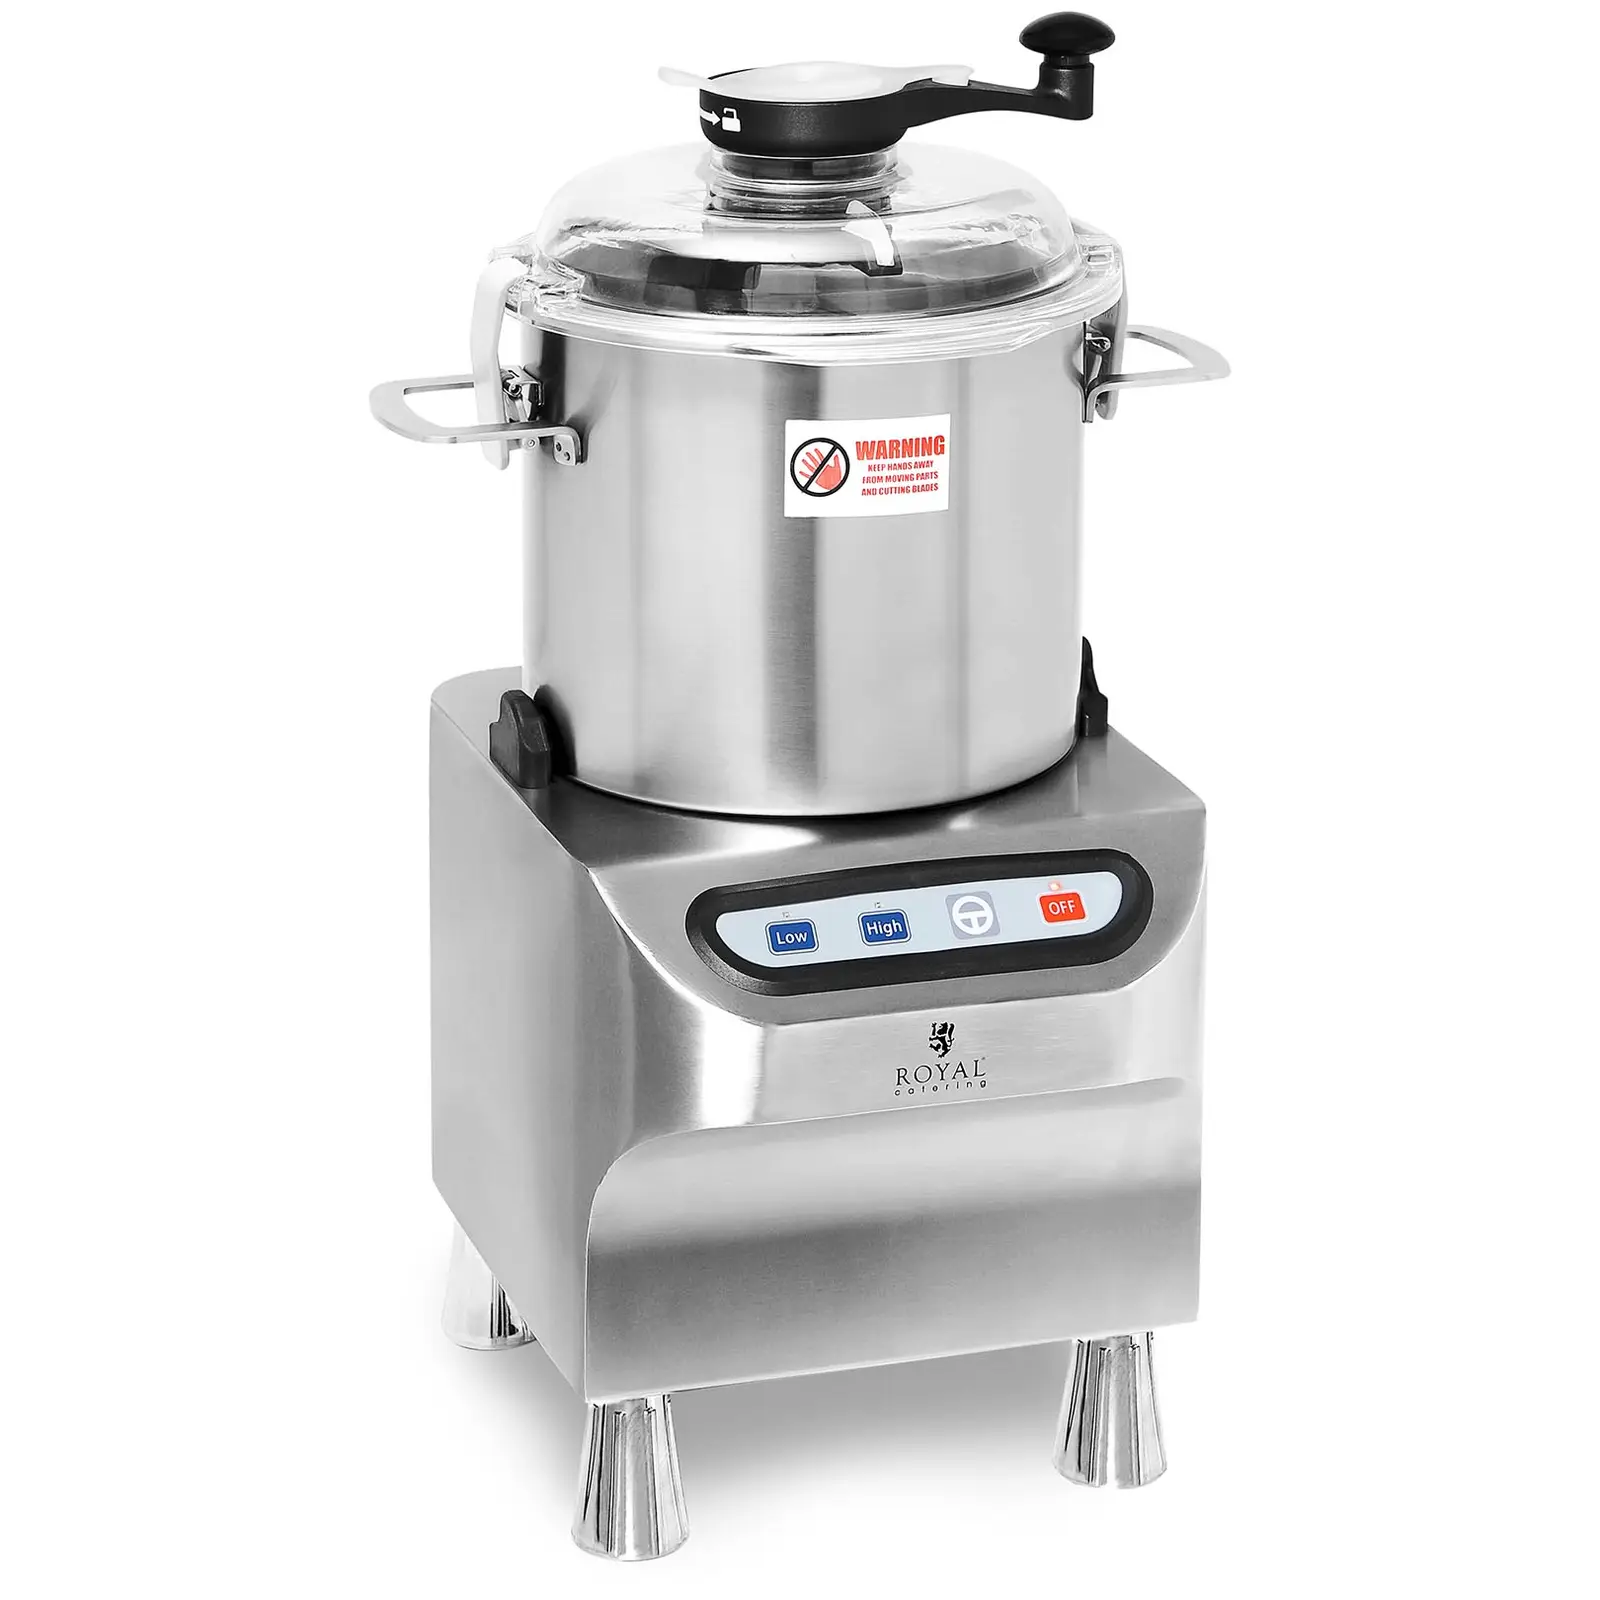 Occasion Cutter cuisine - 1500/2800 tr/min - Royal Catering - 8 l